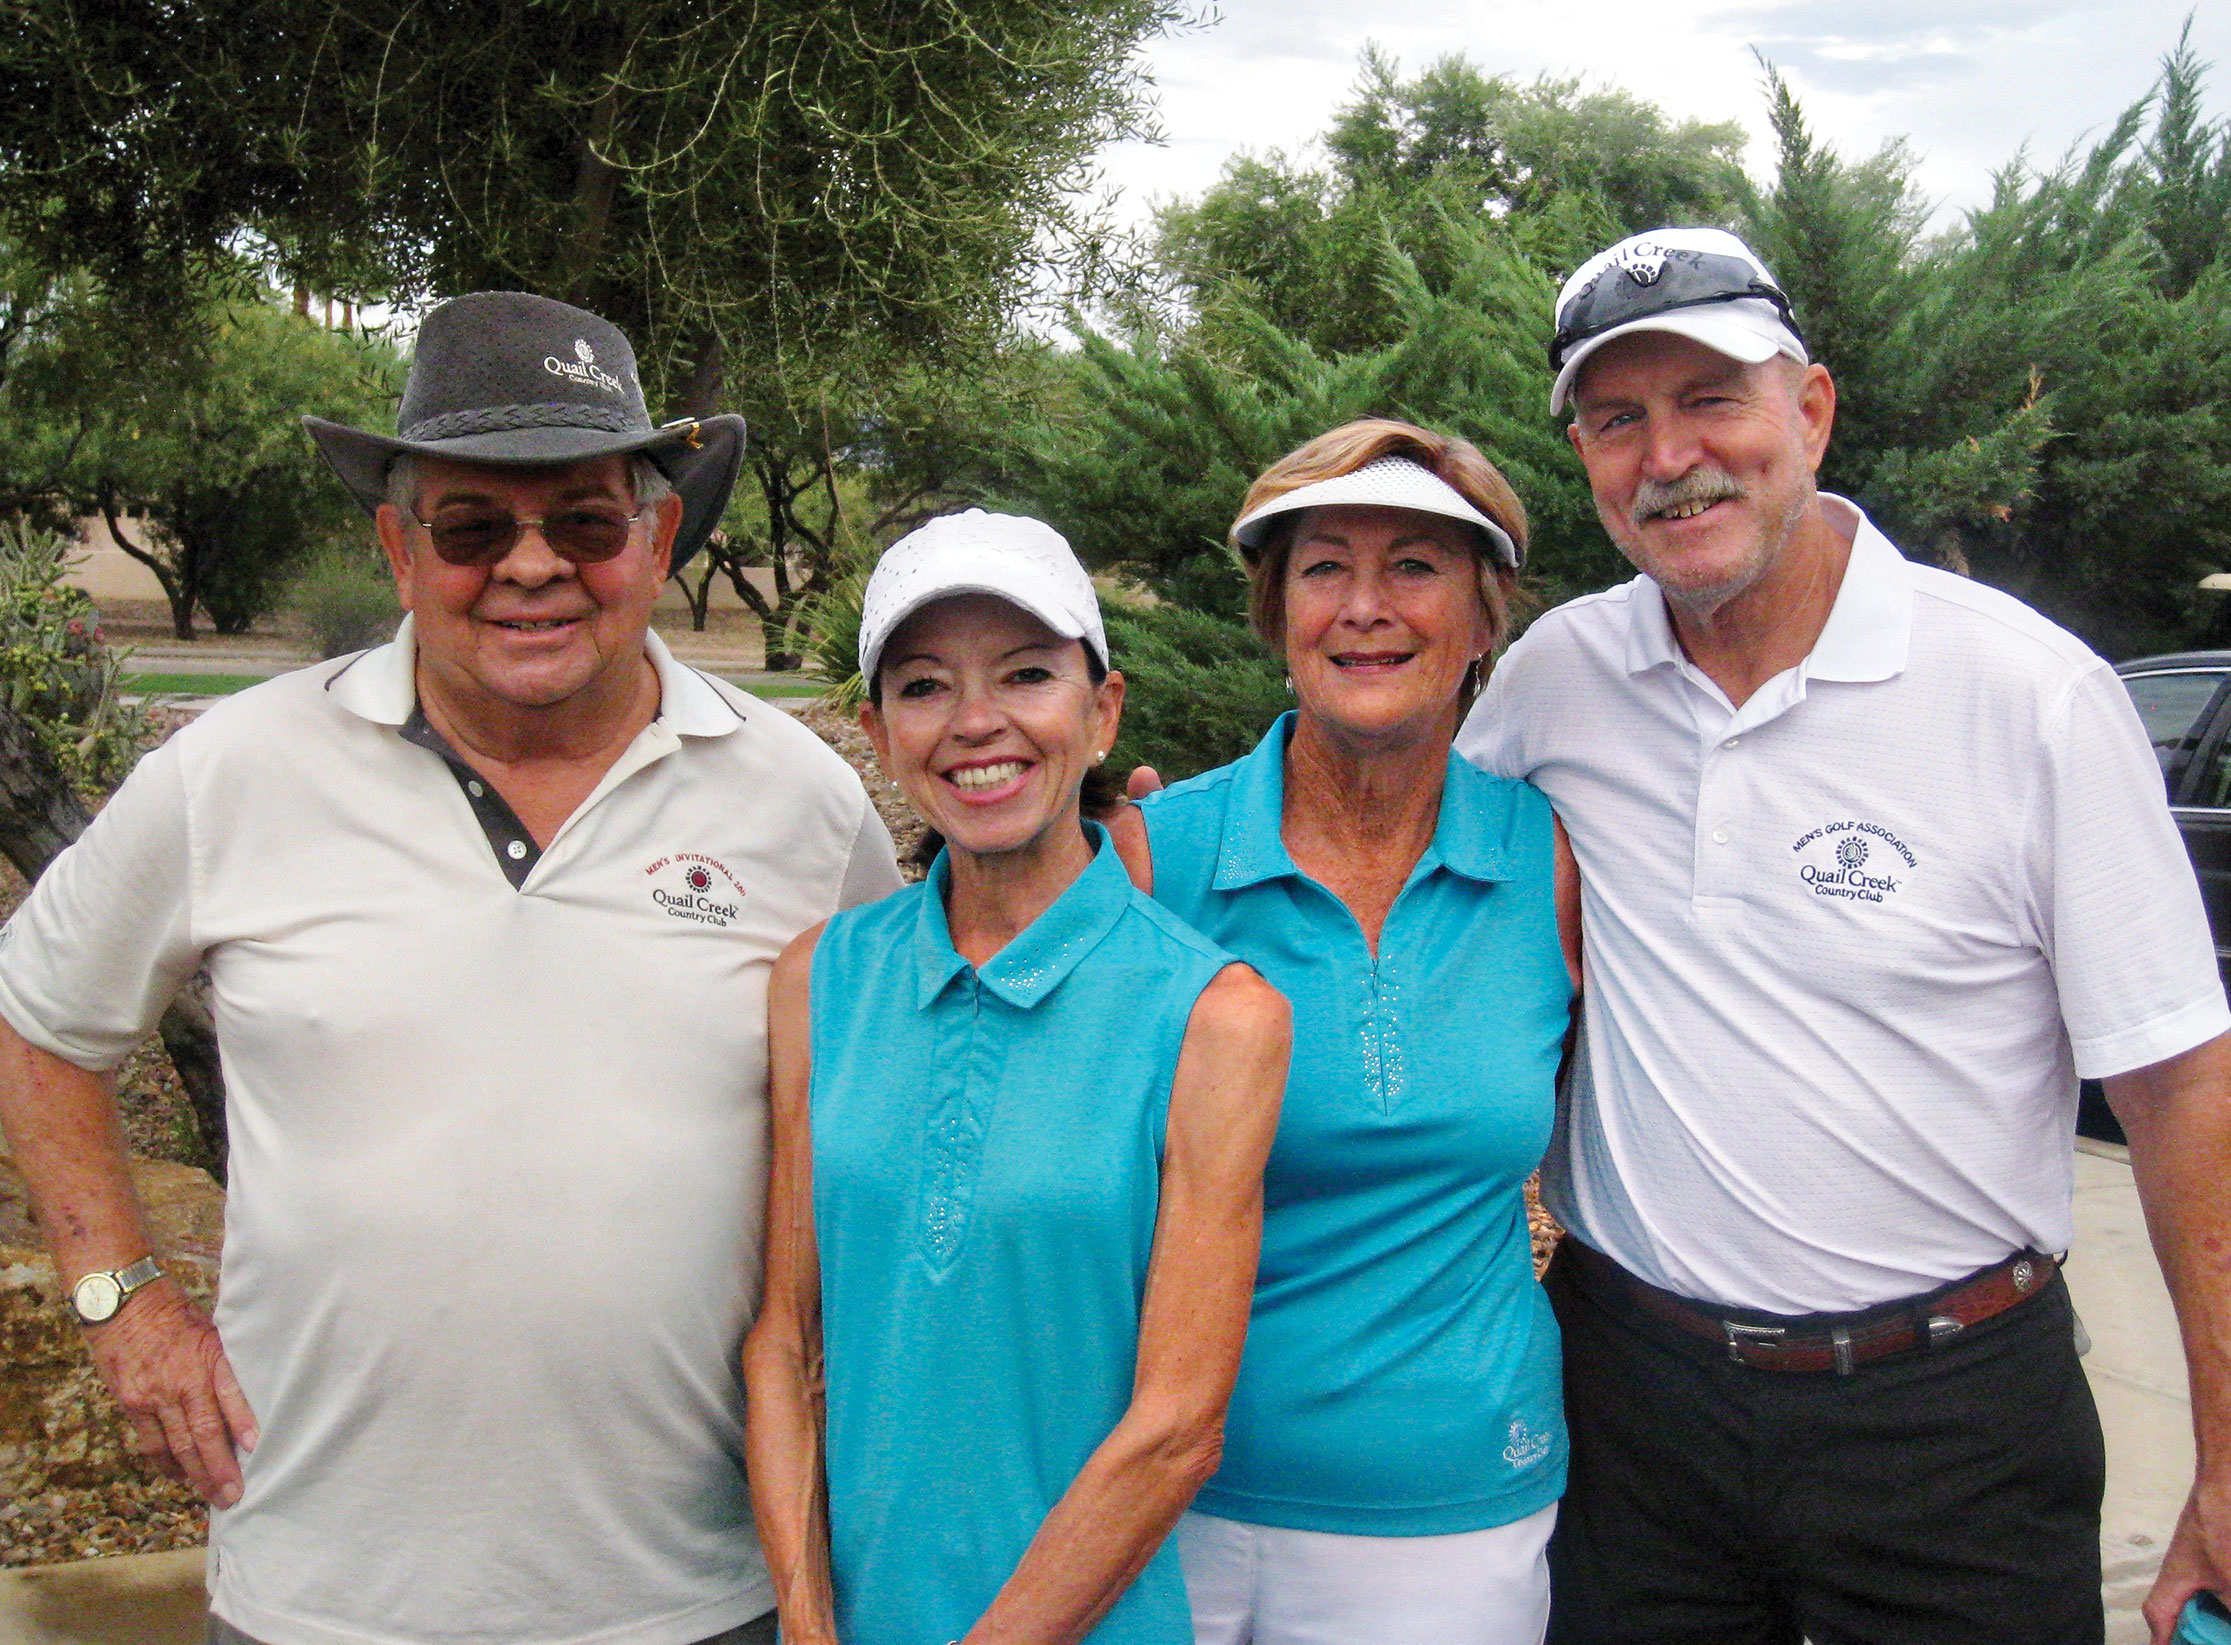 The committee: Roy Barnes, Dreama Fumia, Carol Clifford and Dave Schutt